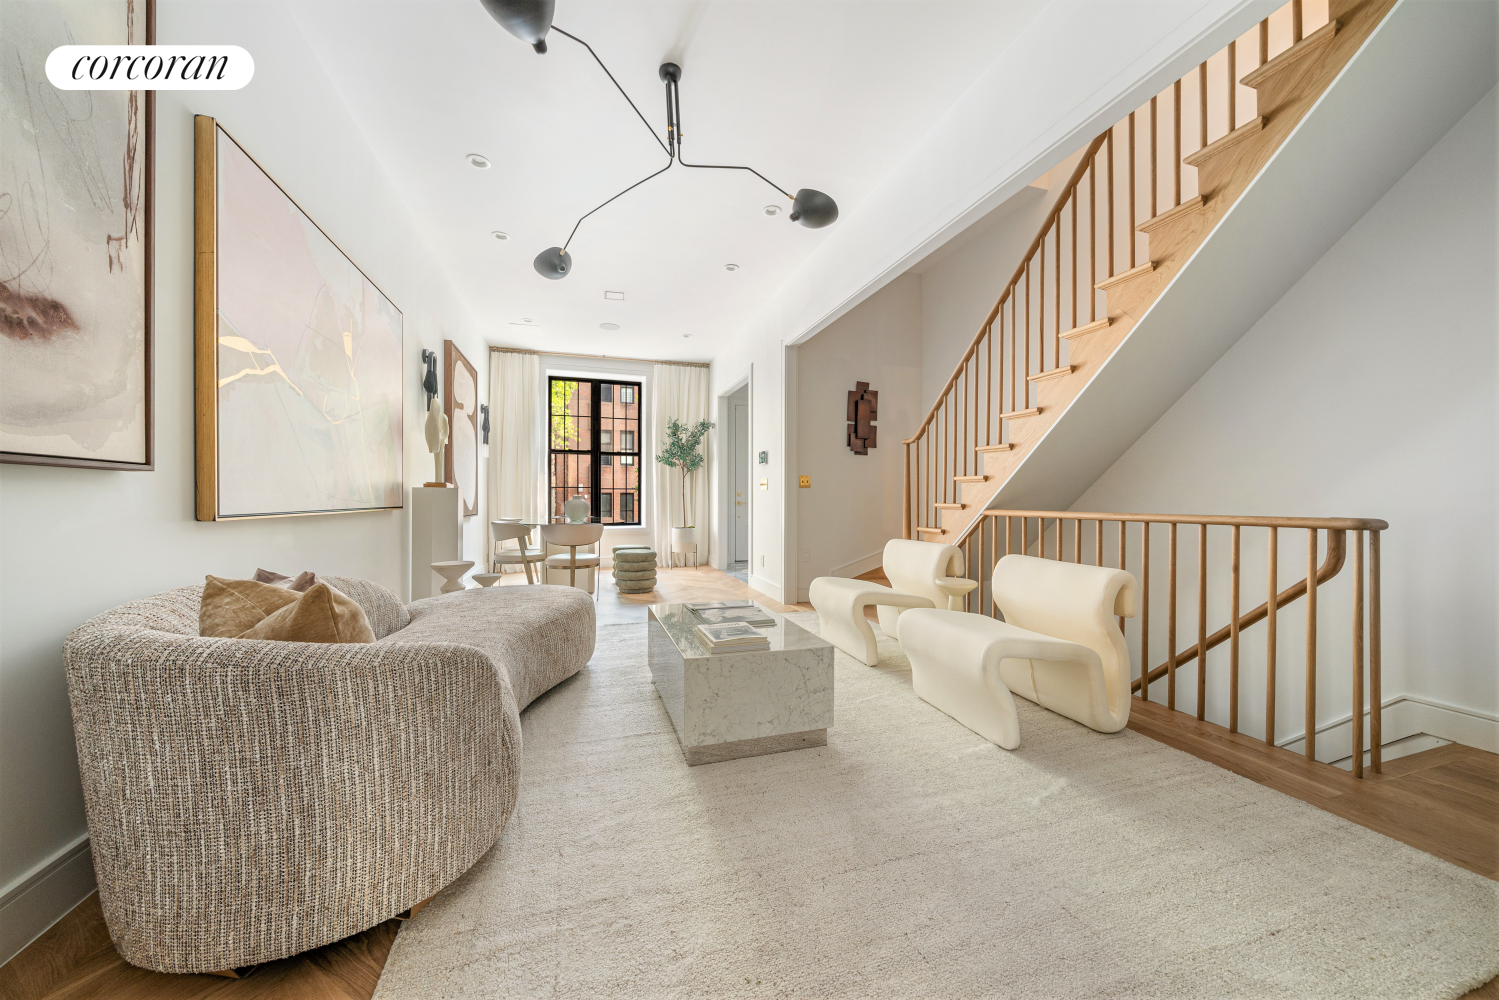 158 West 136th Street, Central Harlem, Upper Manhattan, NYC - 4 Bedrooms  3.5 Bathrooms  10 Rooms - 